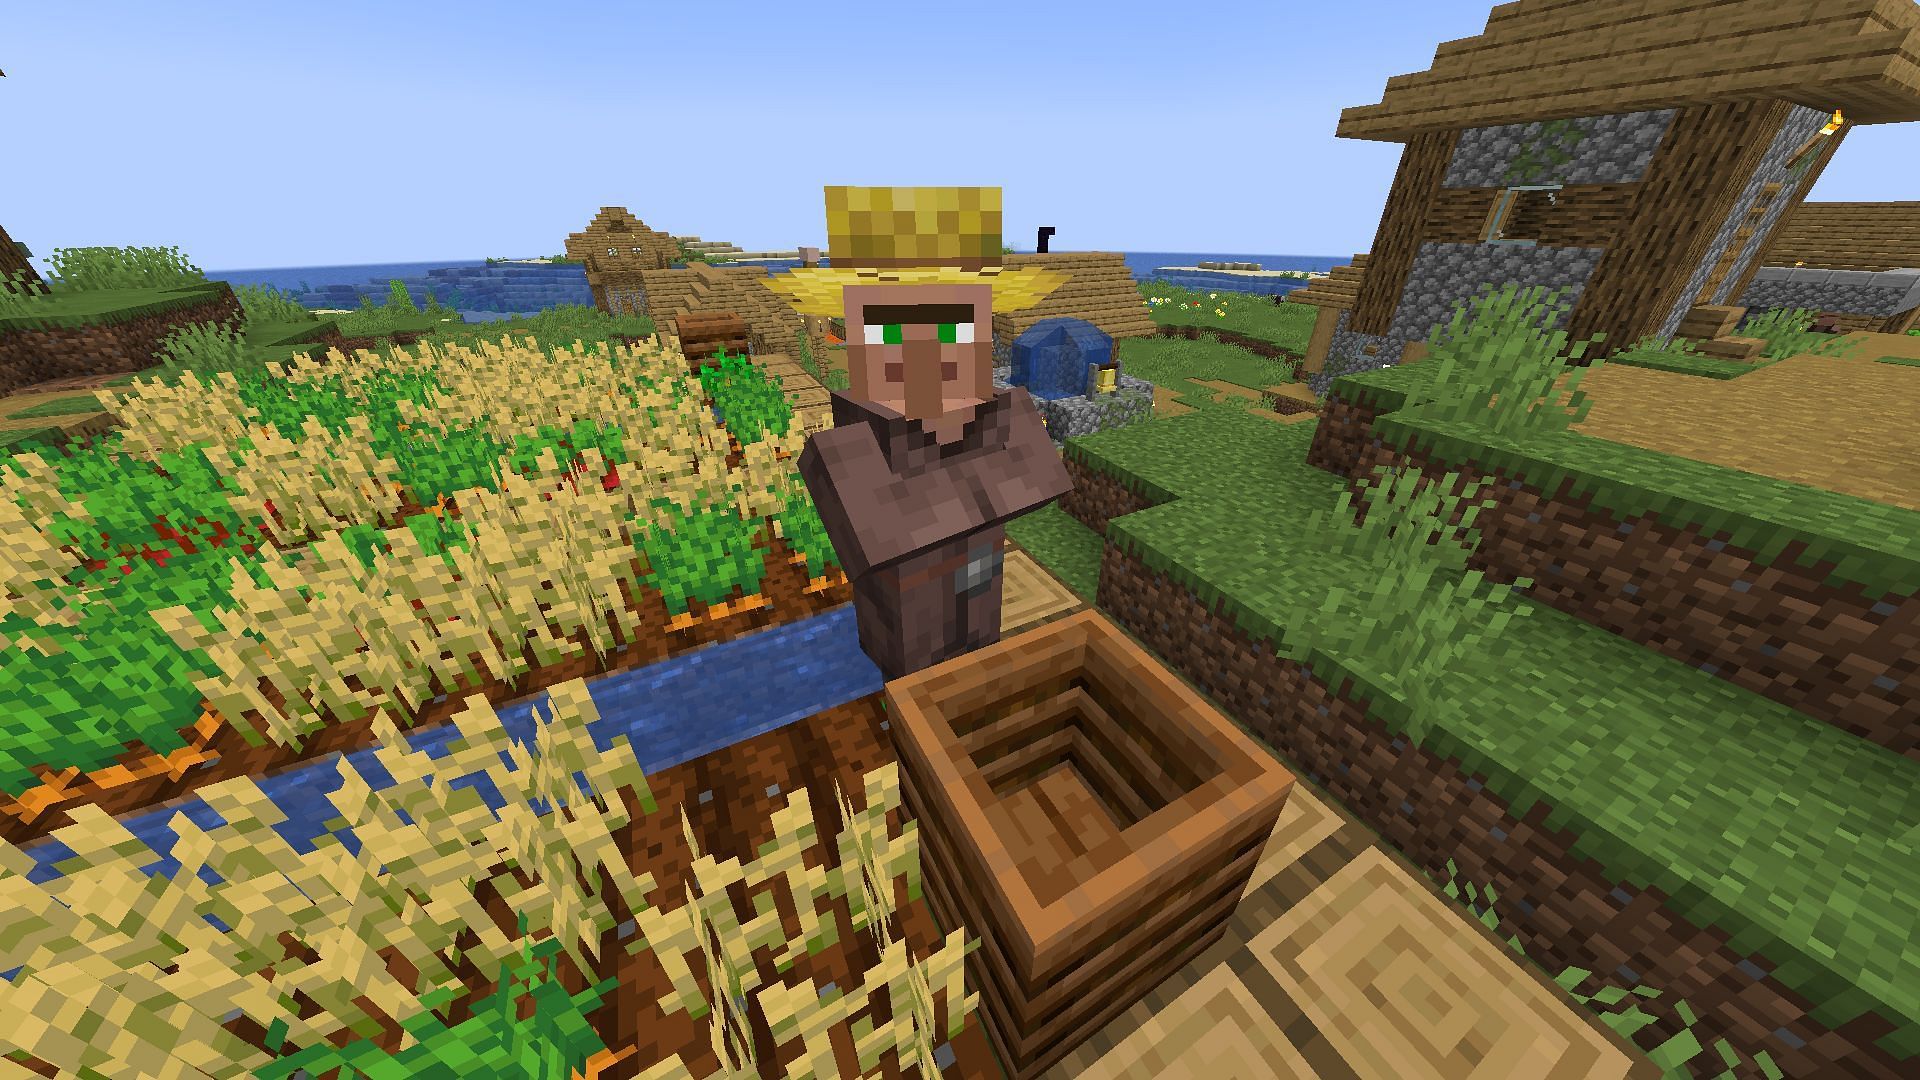 Villagers allow players to trade items for emeralds in Minecraft (Image via Mojang)